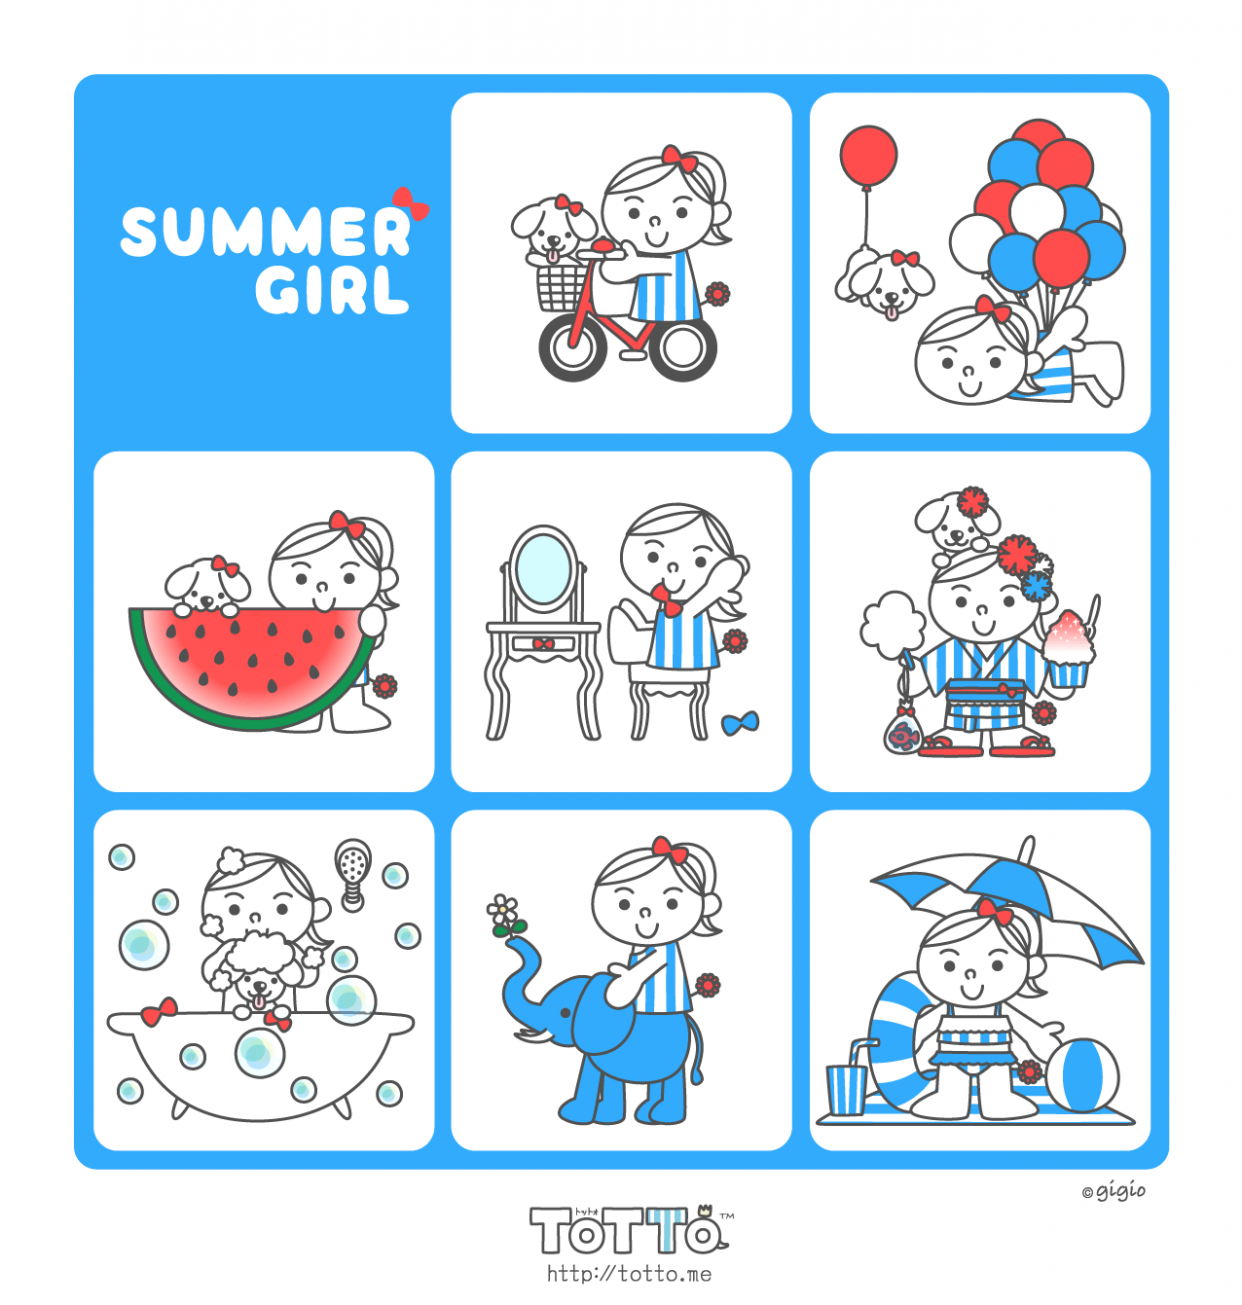 LINE Stickers “Summer ribbon girl” new release!